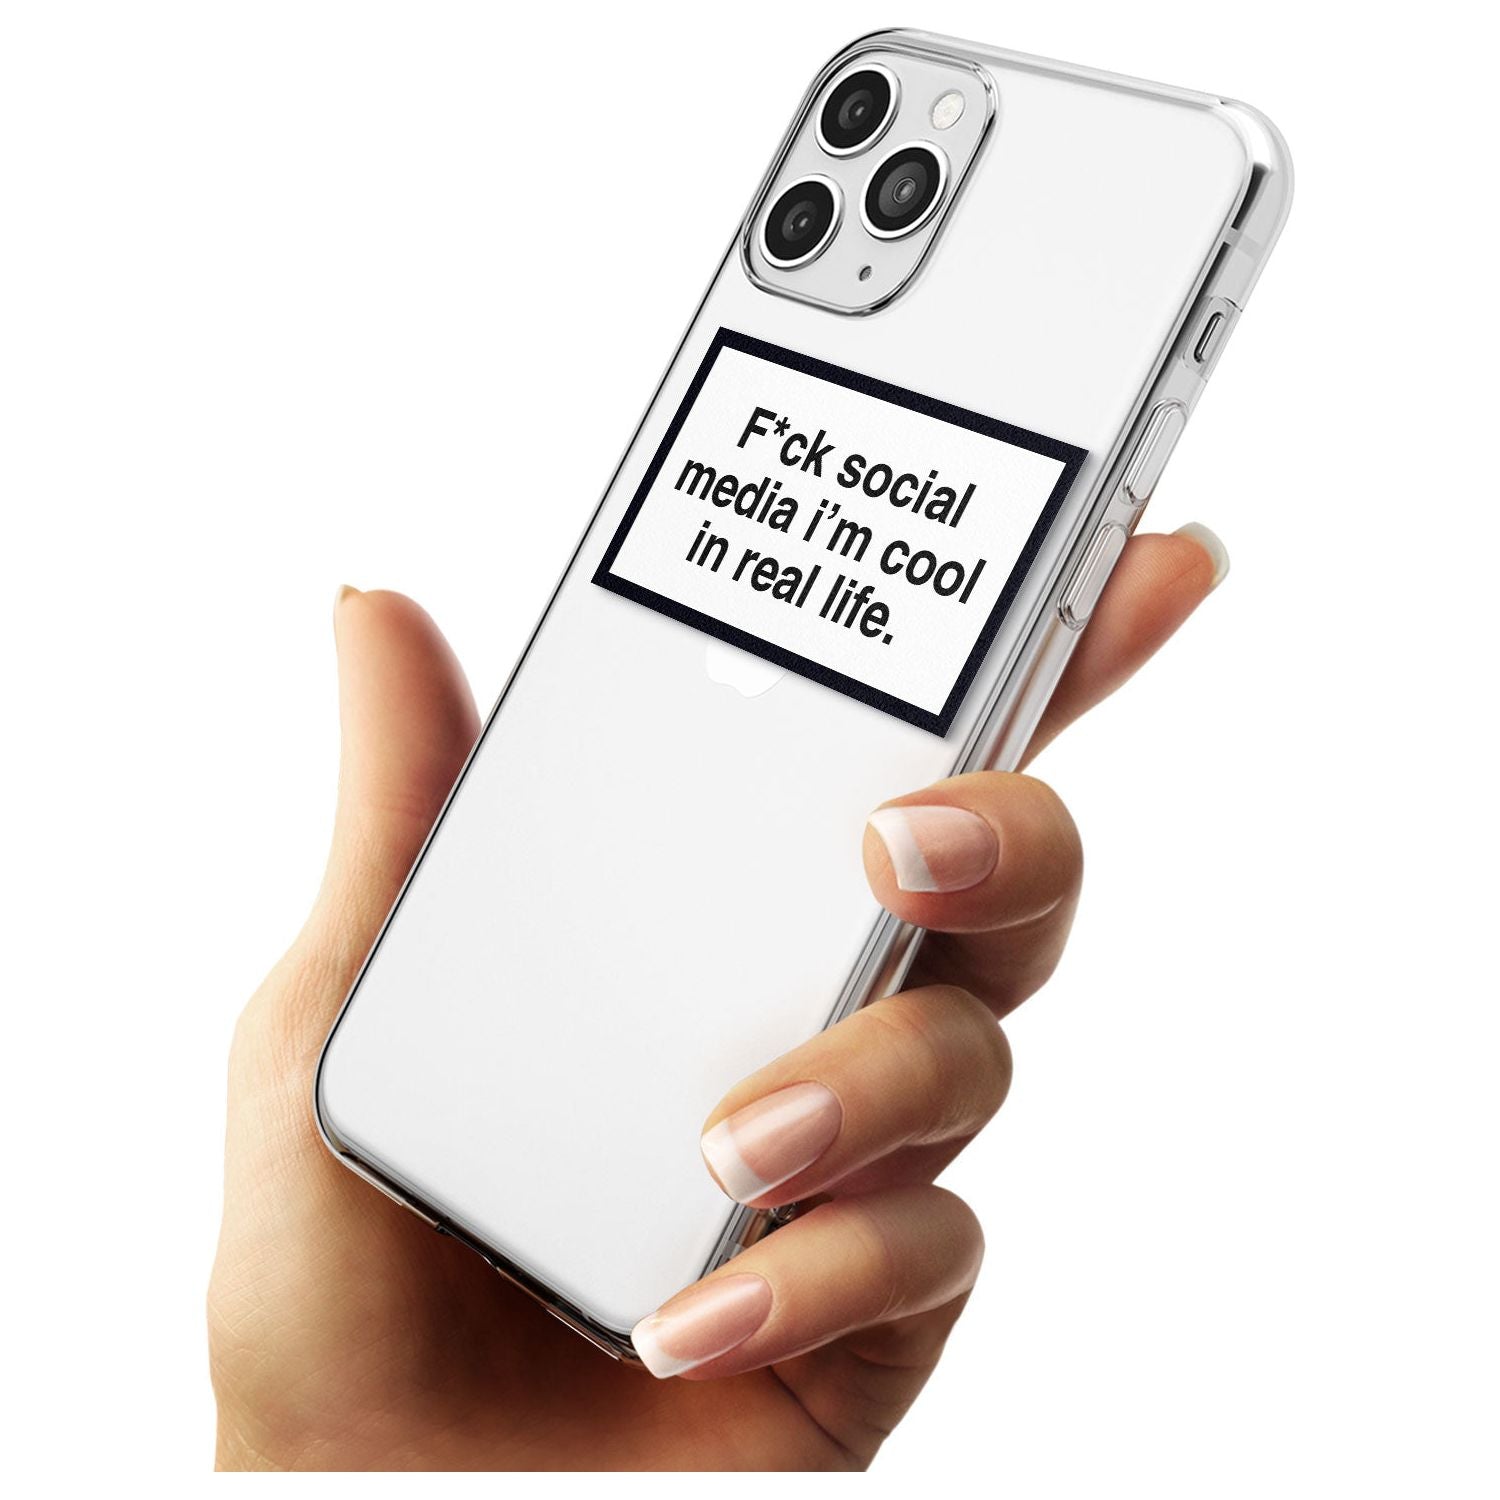 F*ck social media I'm cool in real life Black Impact Phone Case for iPhone 11 Pro Max